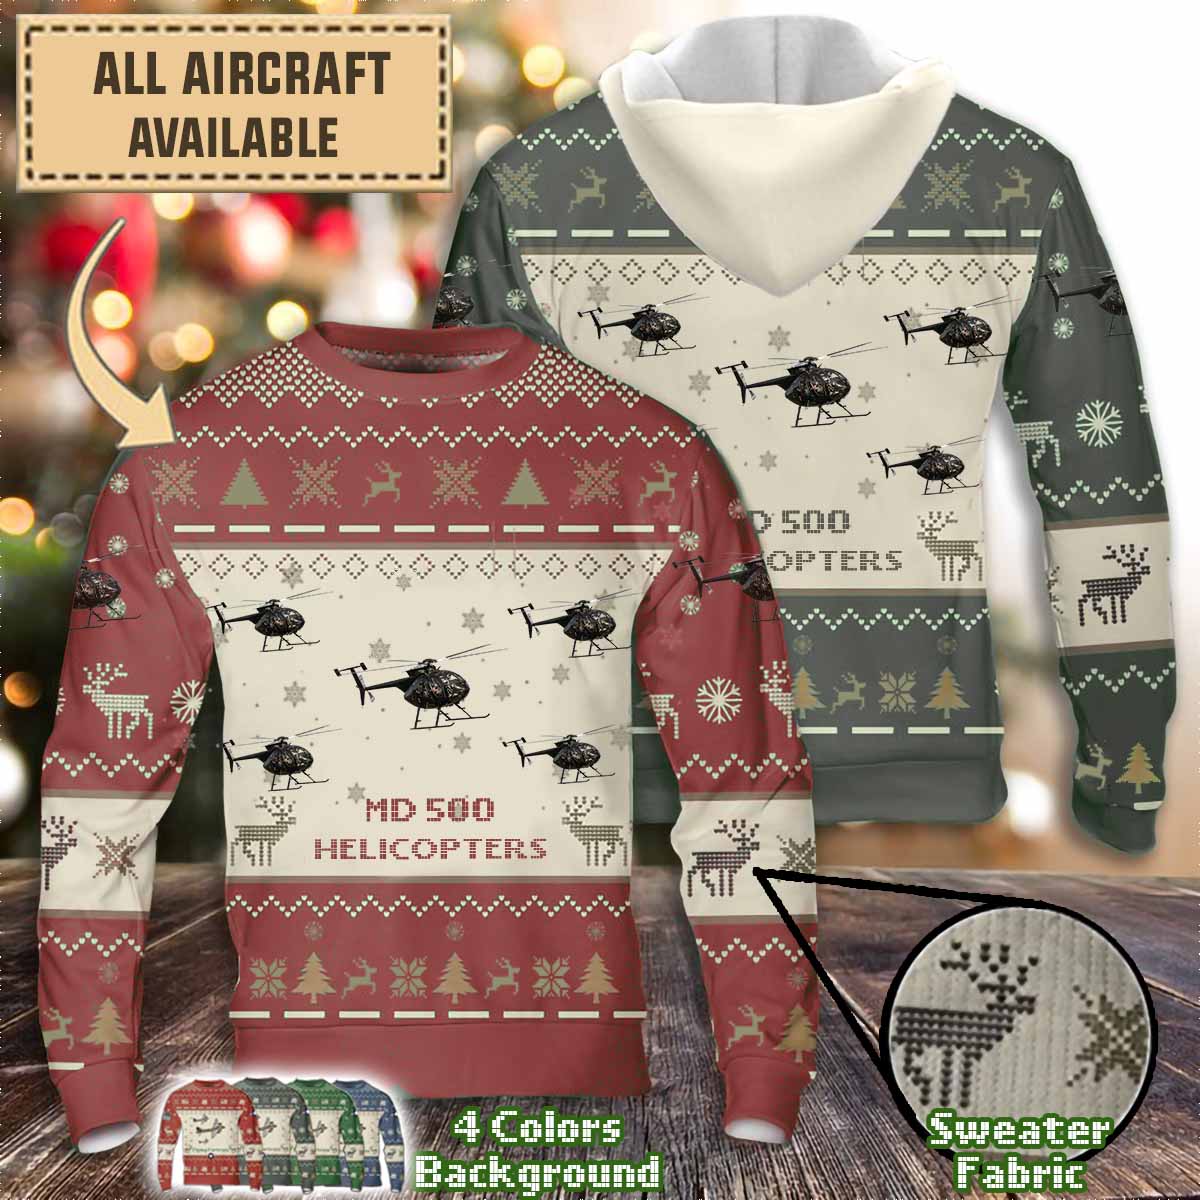 md helicopters md 500aircraft sweater h47ii